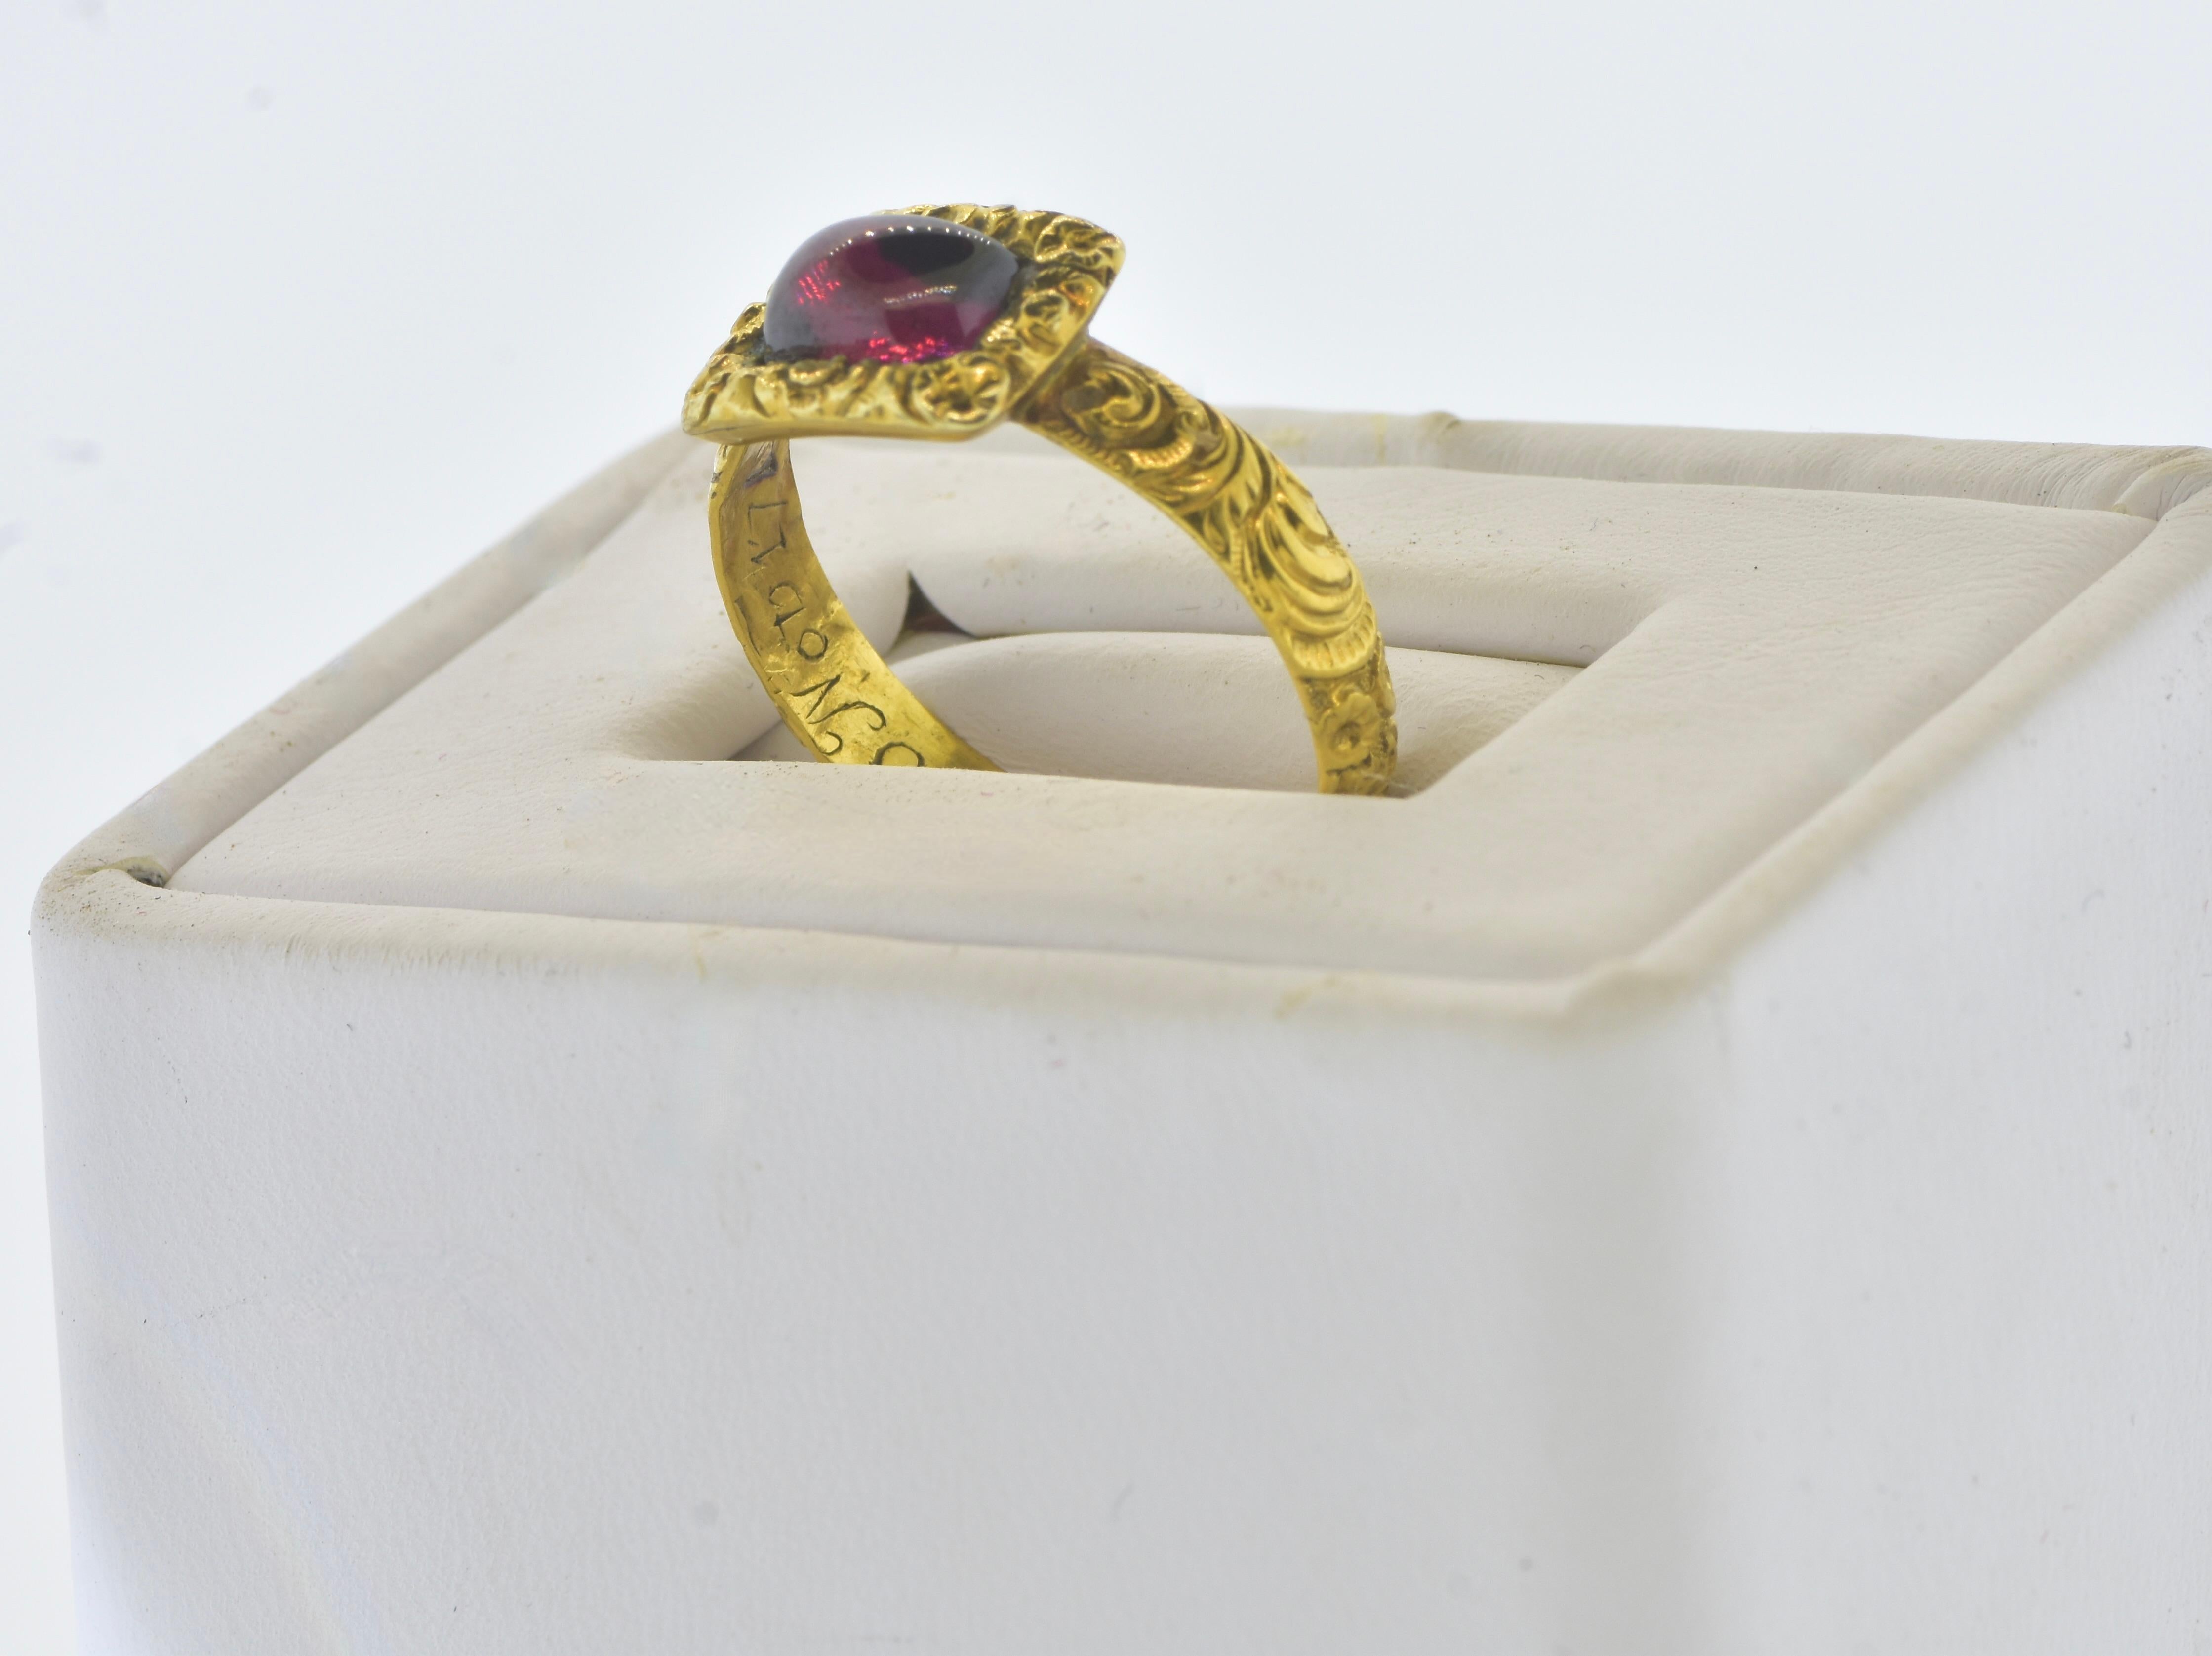 Cabochon Antique 18K and Garnet Ring,  Inscribed and dated 1712-1765.